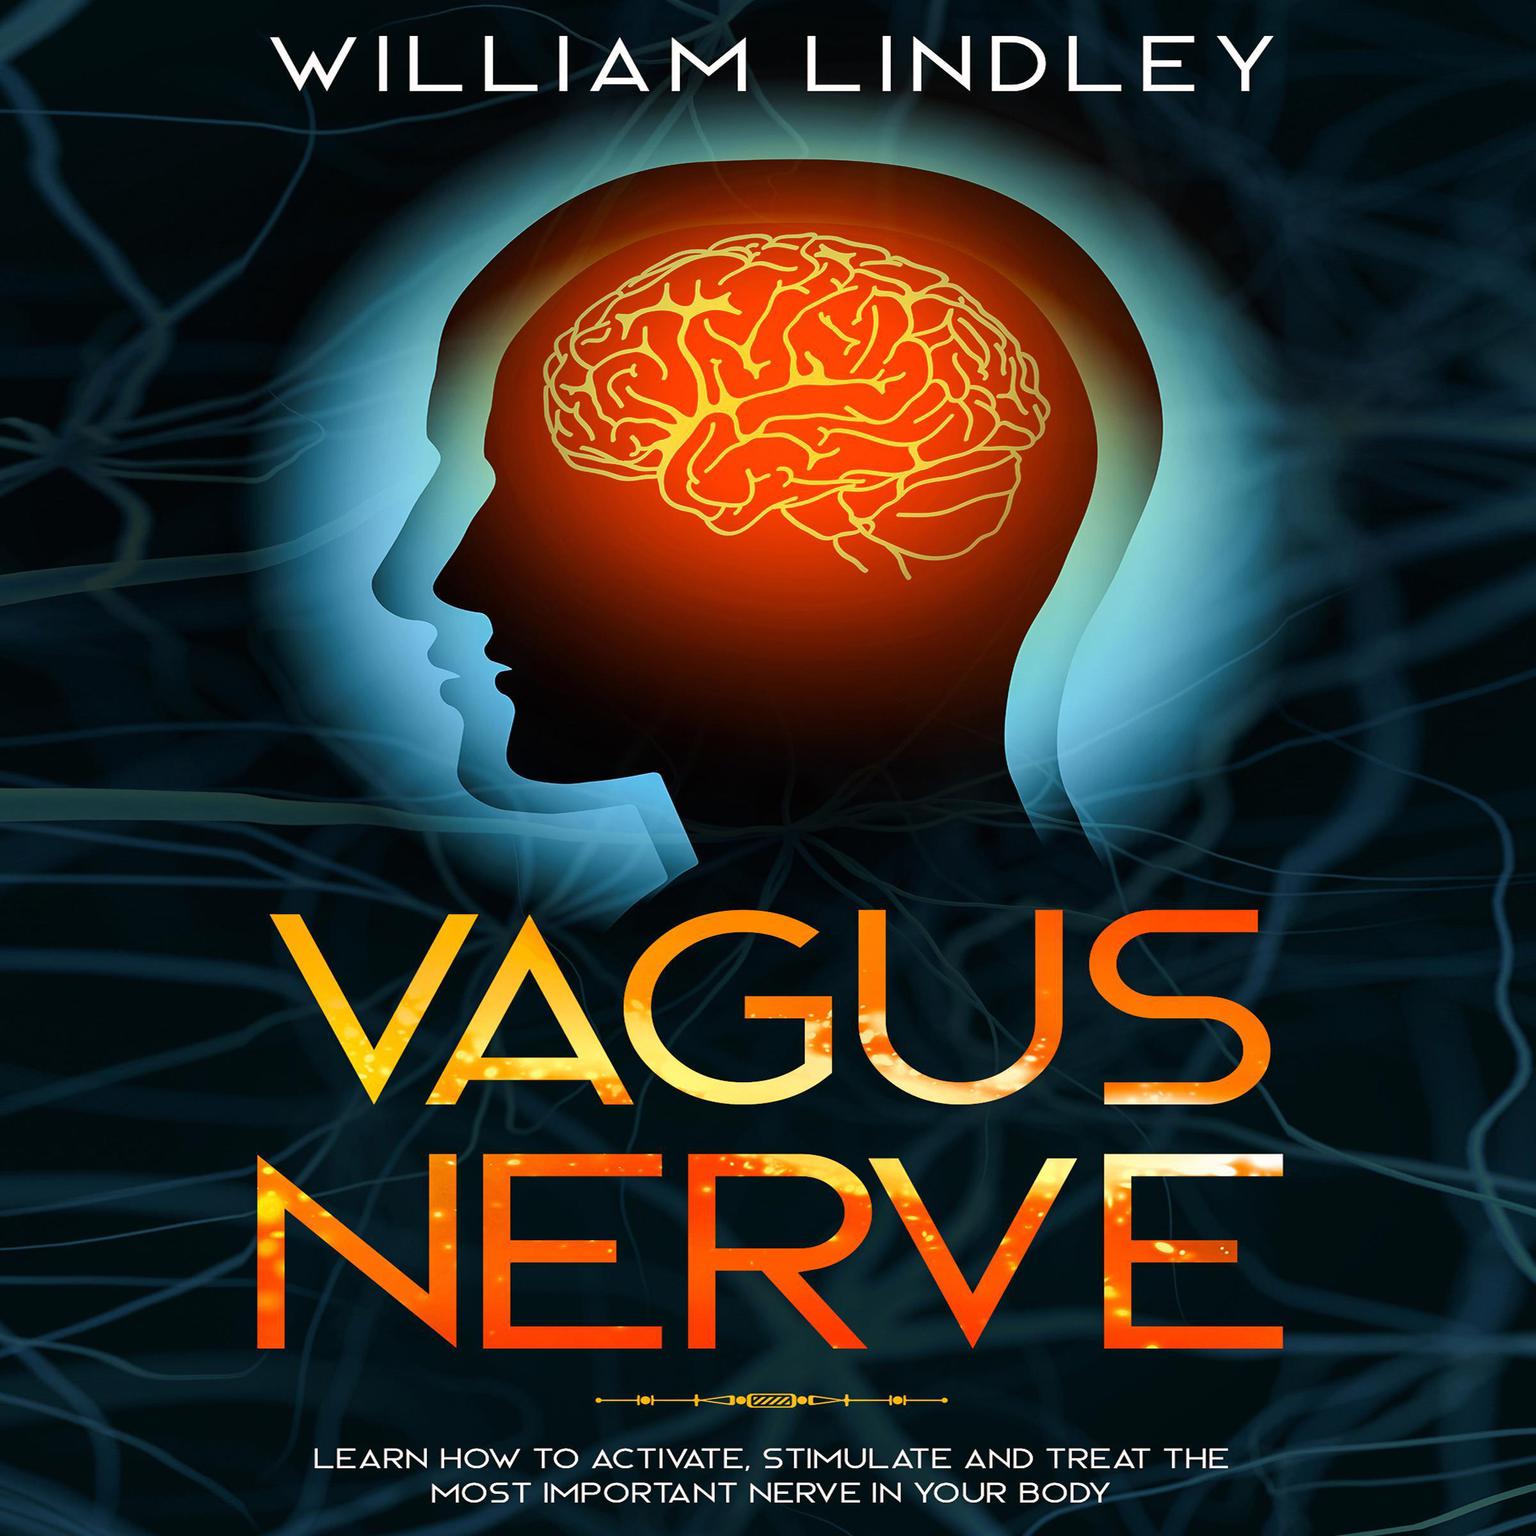 Vagus Nerve: Learn How to Activate, Stimulate, and Treat the Most Important Nerve in Your Body Audiobook, by William Lindley